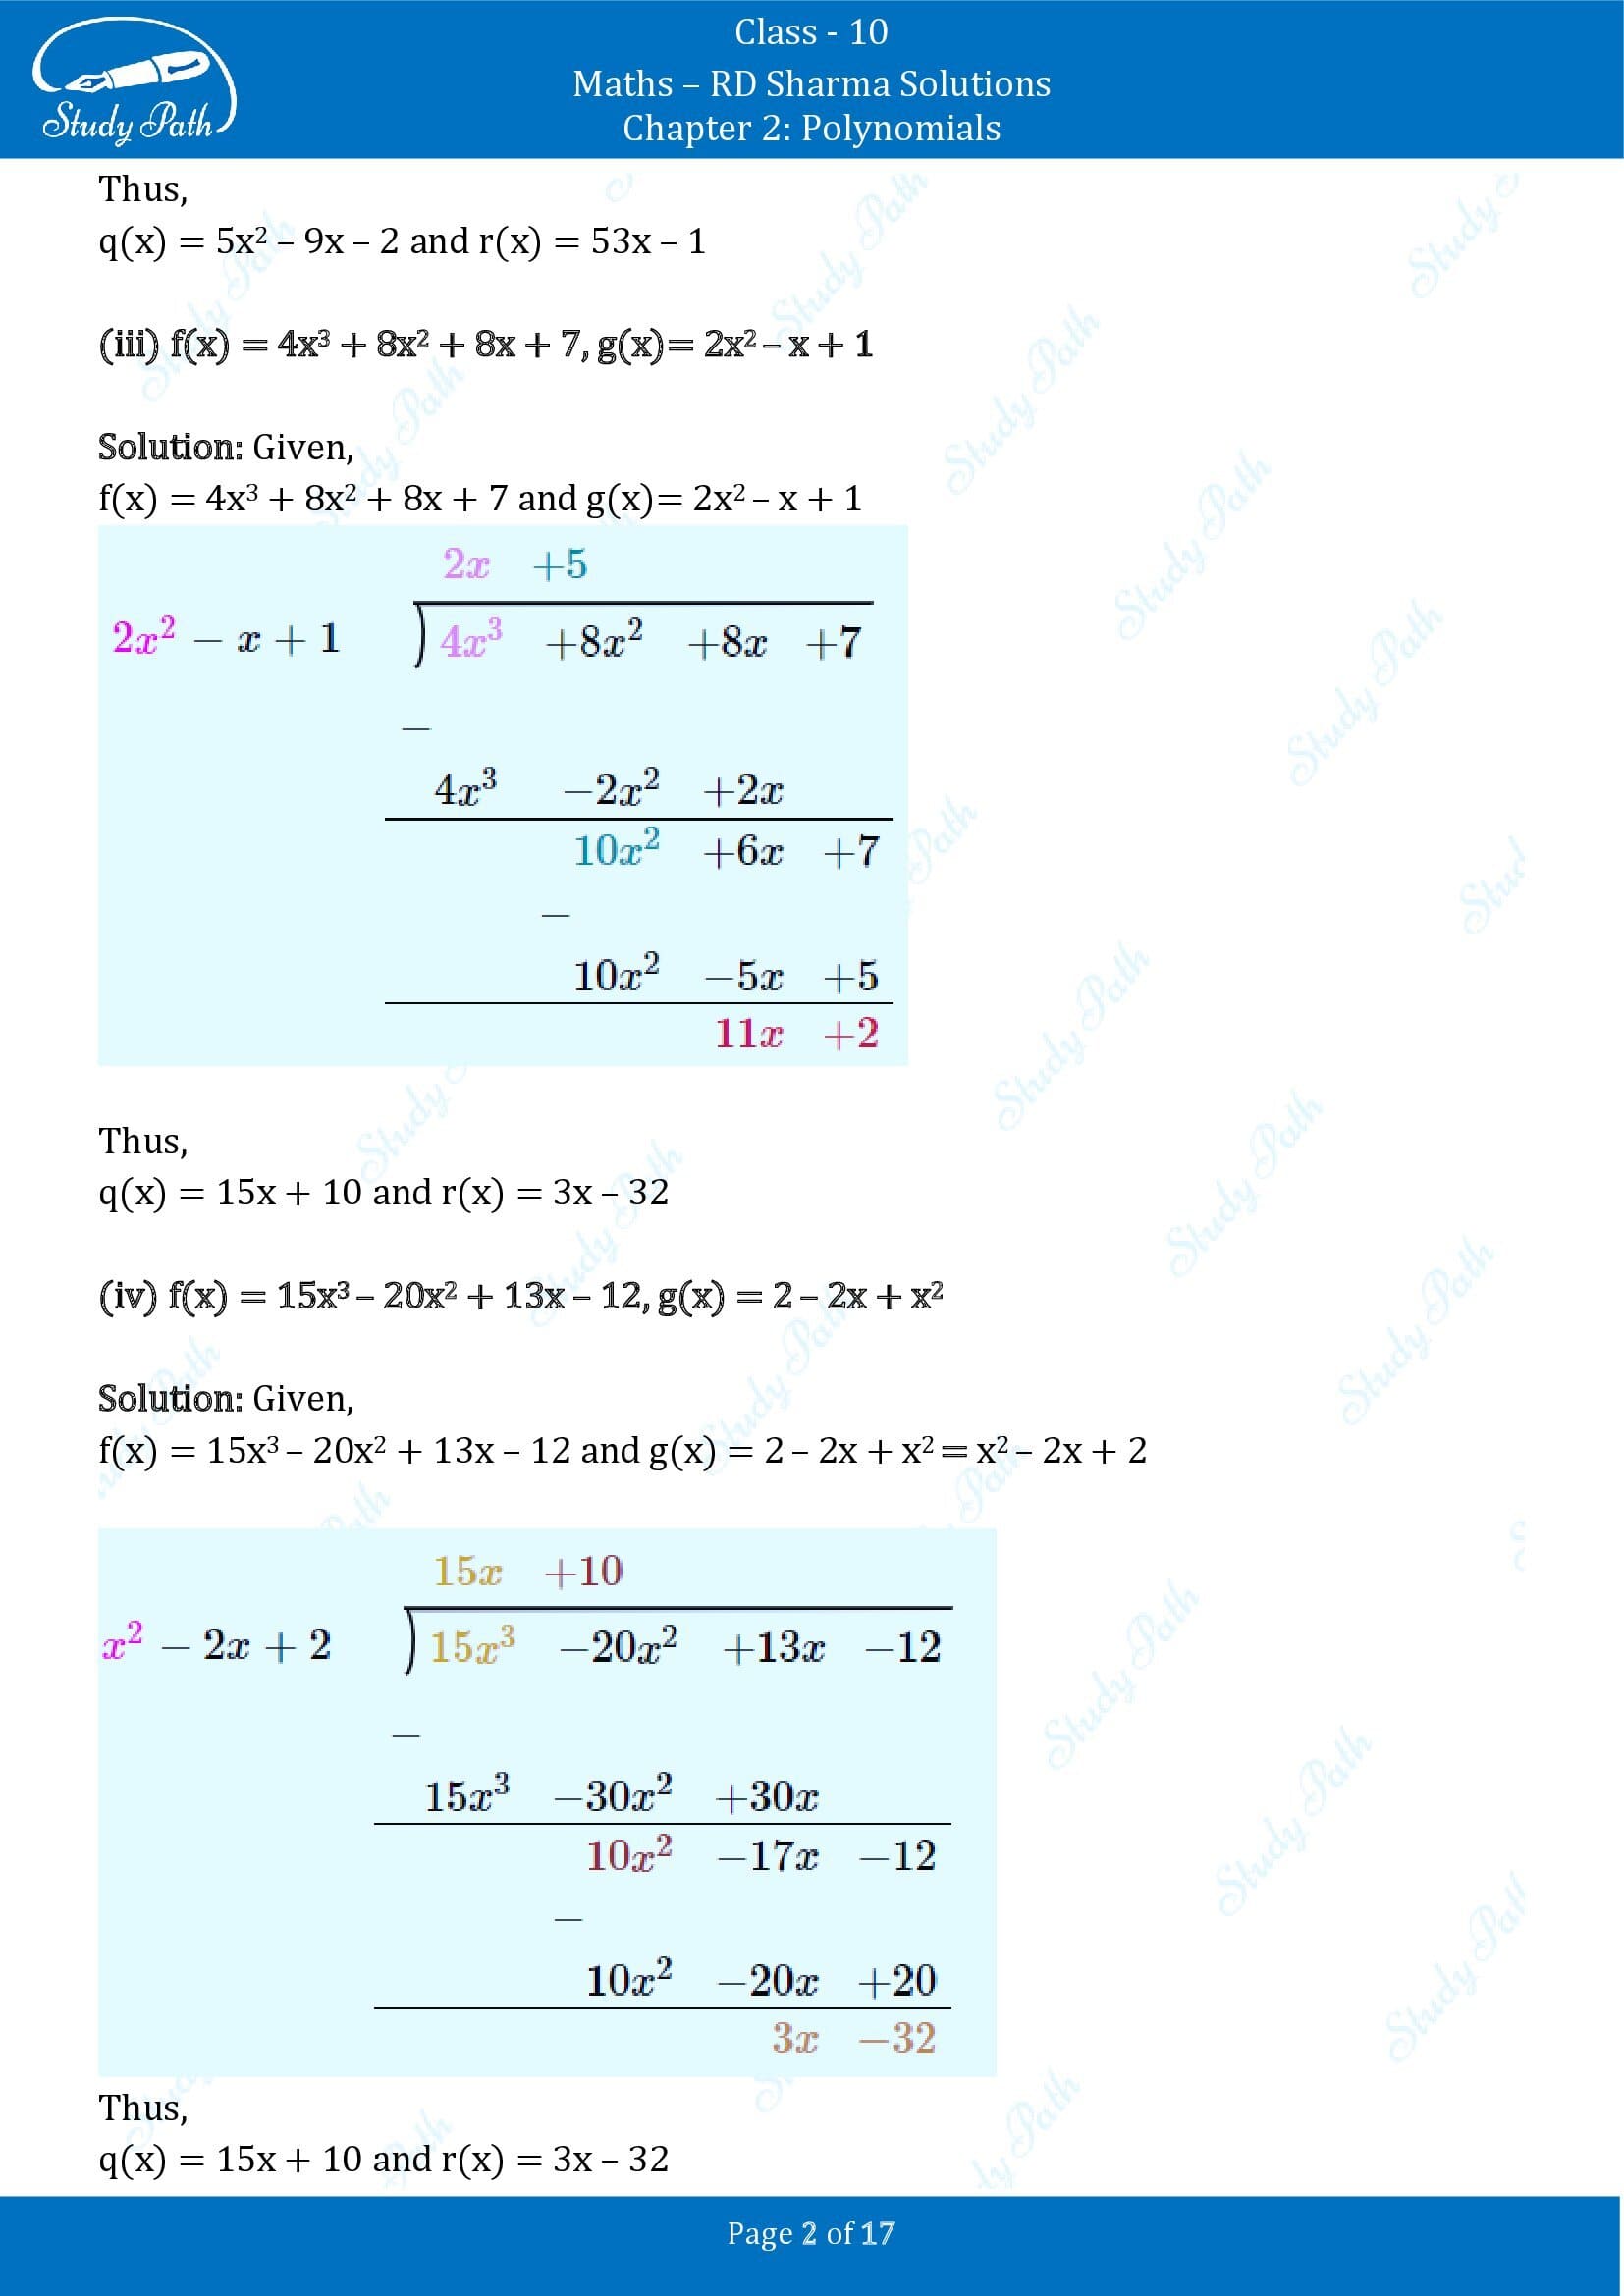 RD Sharma Solutions Class 10 Chapter 2 Polynomials Exercise 2.3 00002